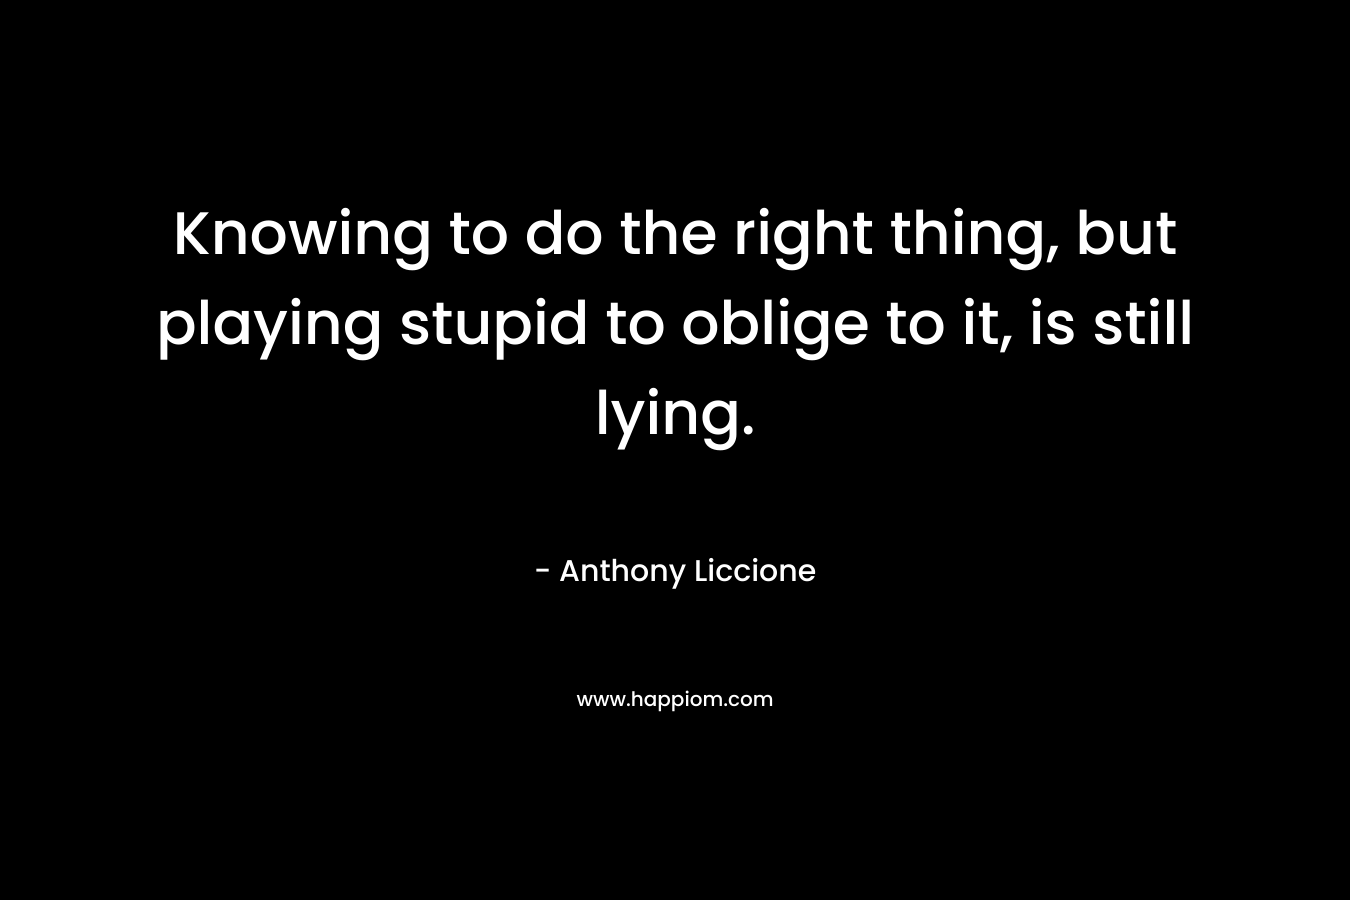 Knowing to do the right thing, but playing stupid to oblige to it, is still lying. – Anthony Liccione